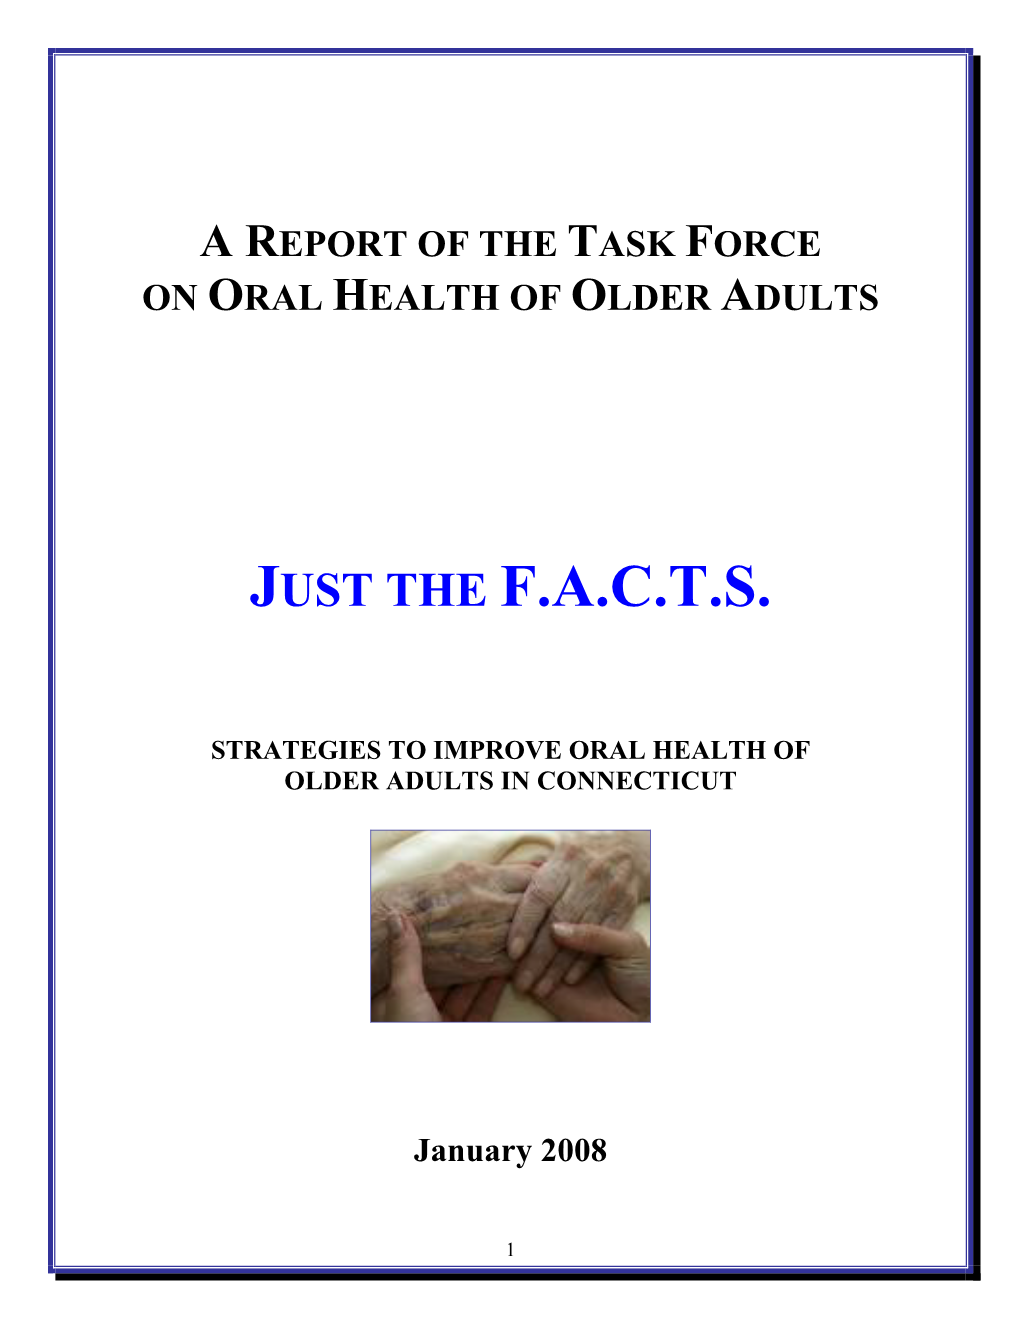 Areport of the Task Force